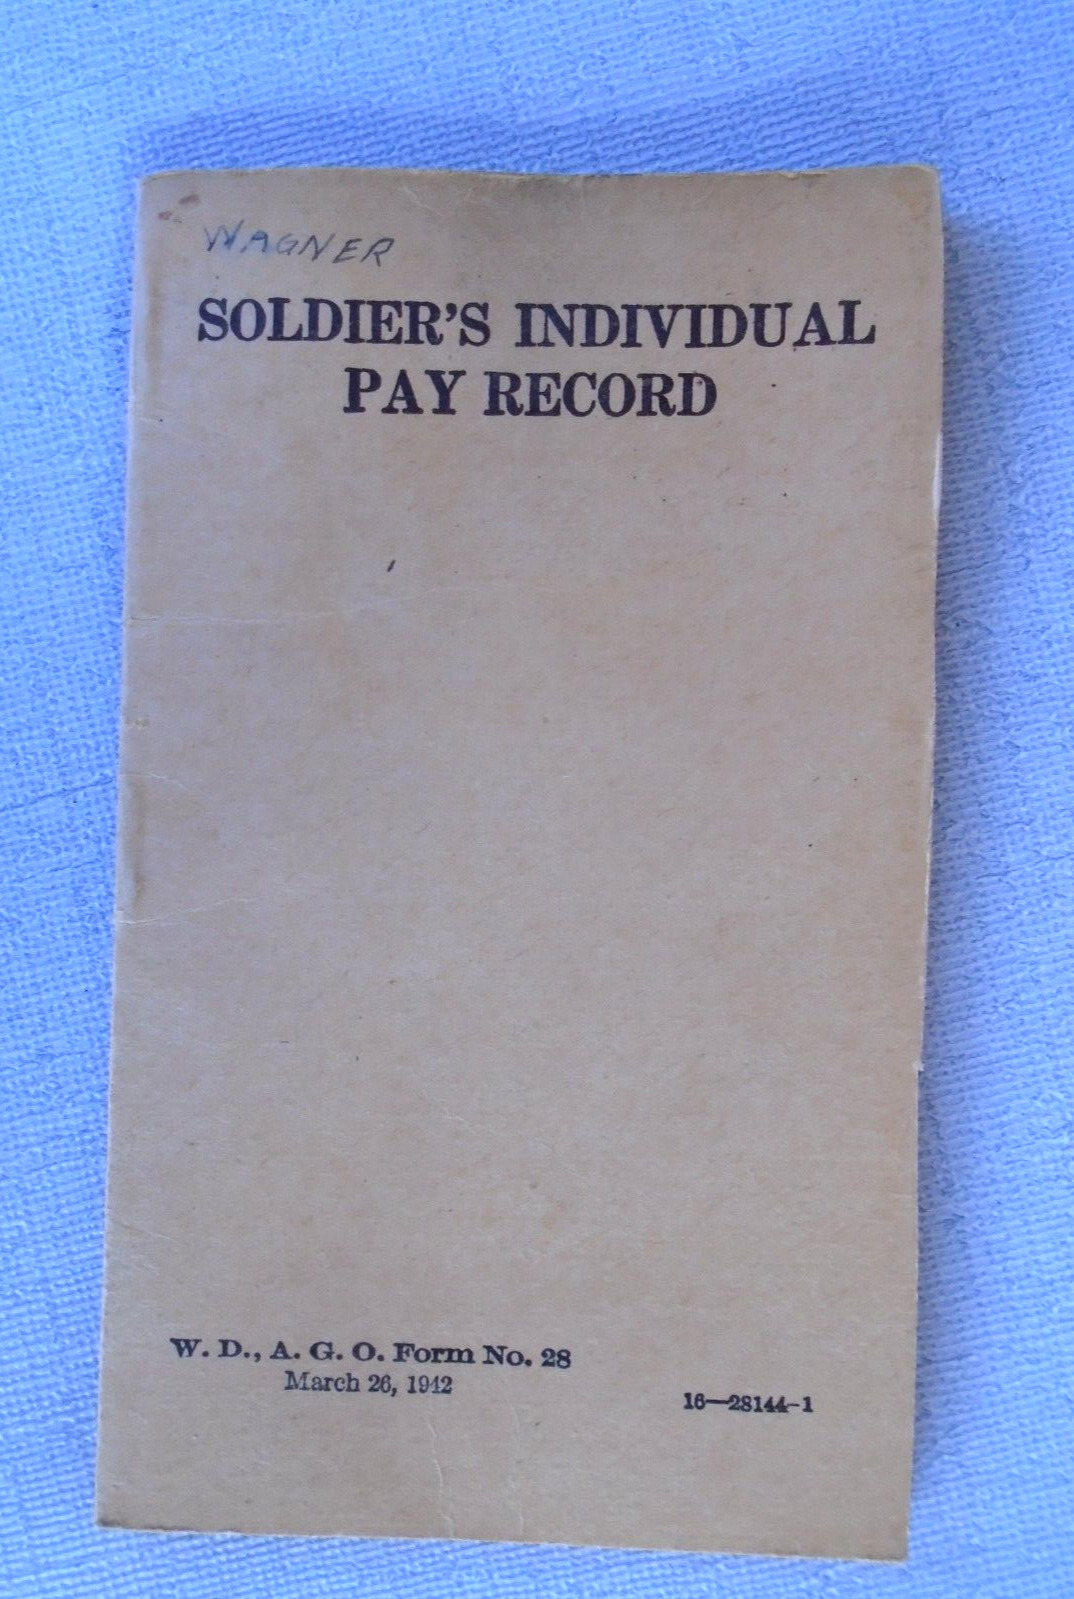 Soldier's Individual Pay Record, dated 1944